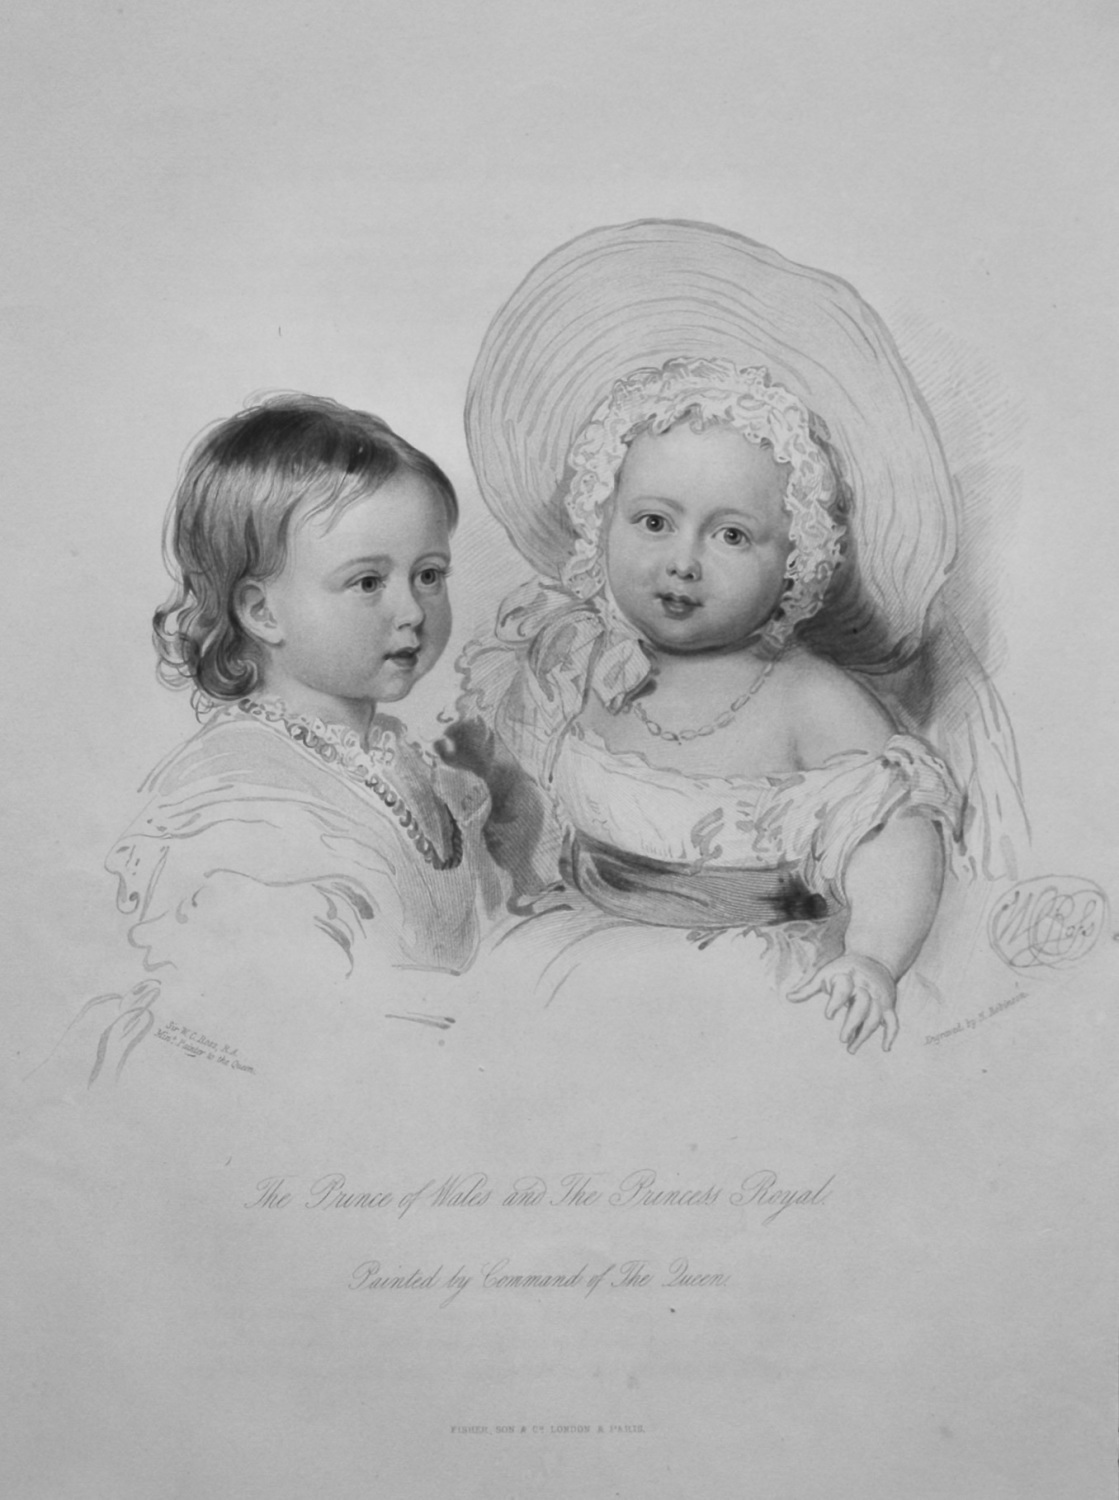 The Prince of Wales and The Princess Royal. : Painted by Command of The Que